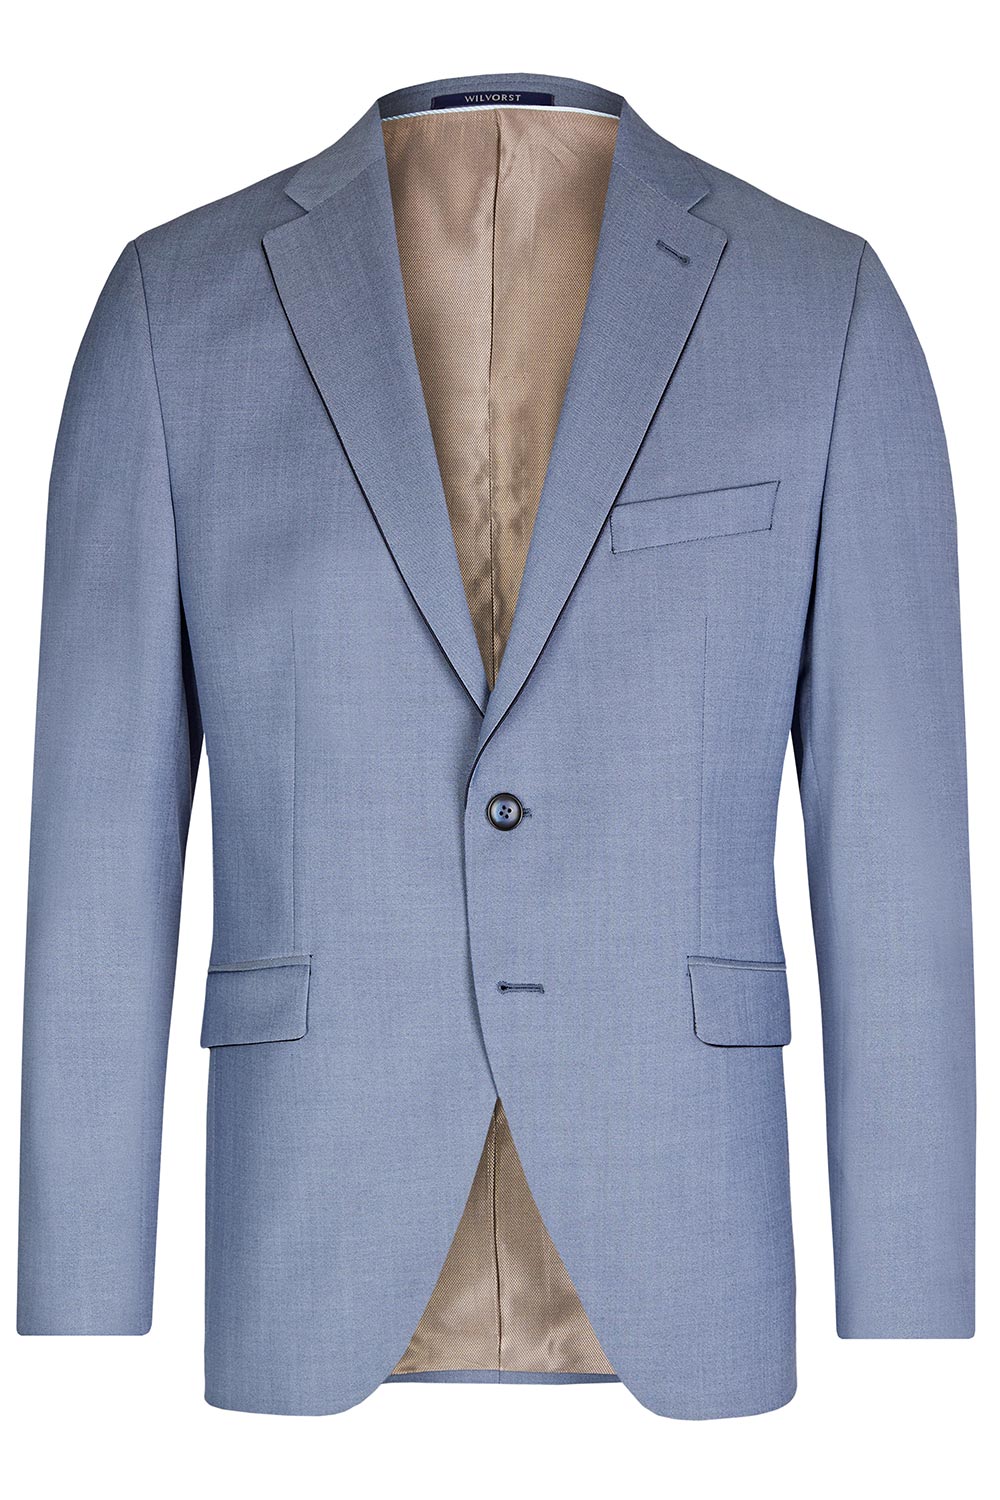 Blue 3 piece Wedding Suit - Tom Murphy's Formal and Menswear